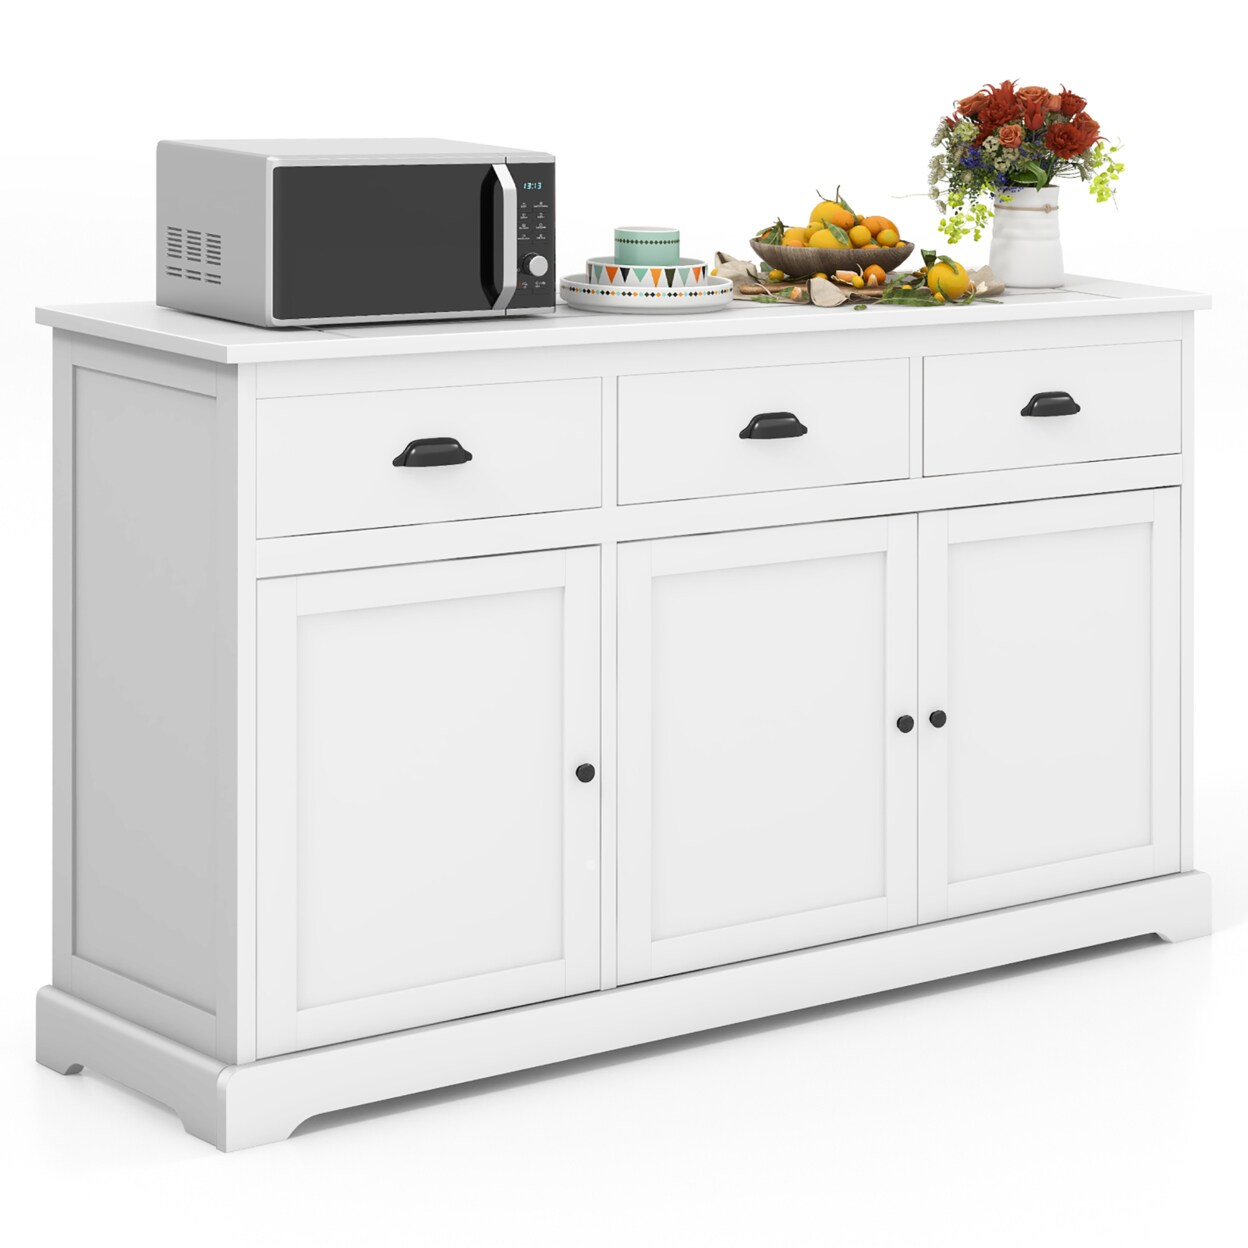 Gymax 3 Drawers Sideboard Buffet Table Storage Console Cabinet Entryway Cupboard White